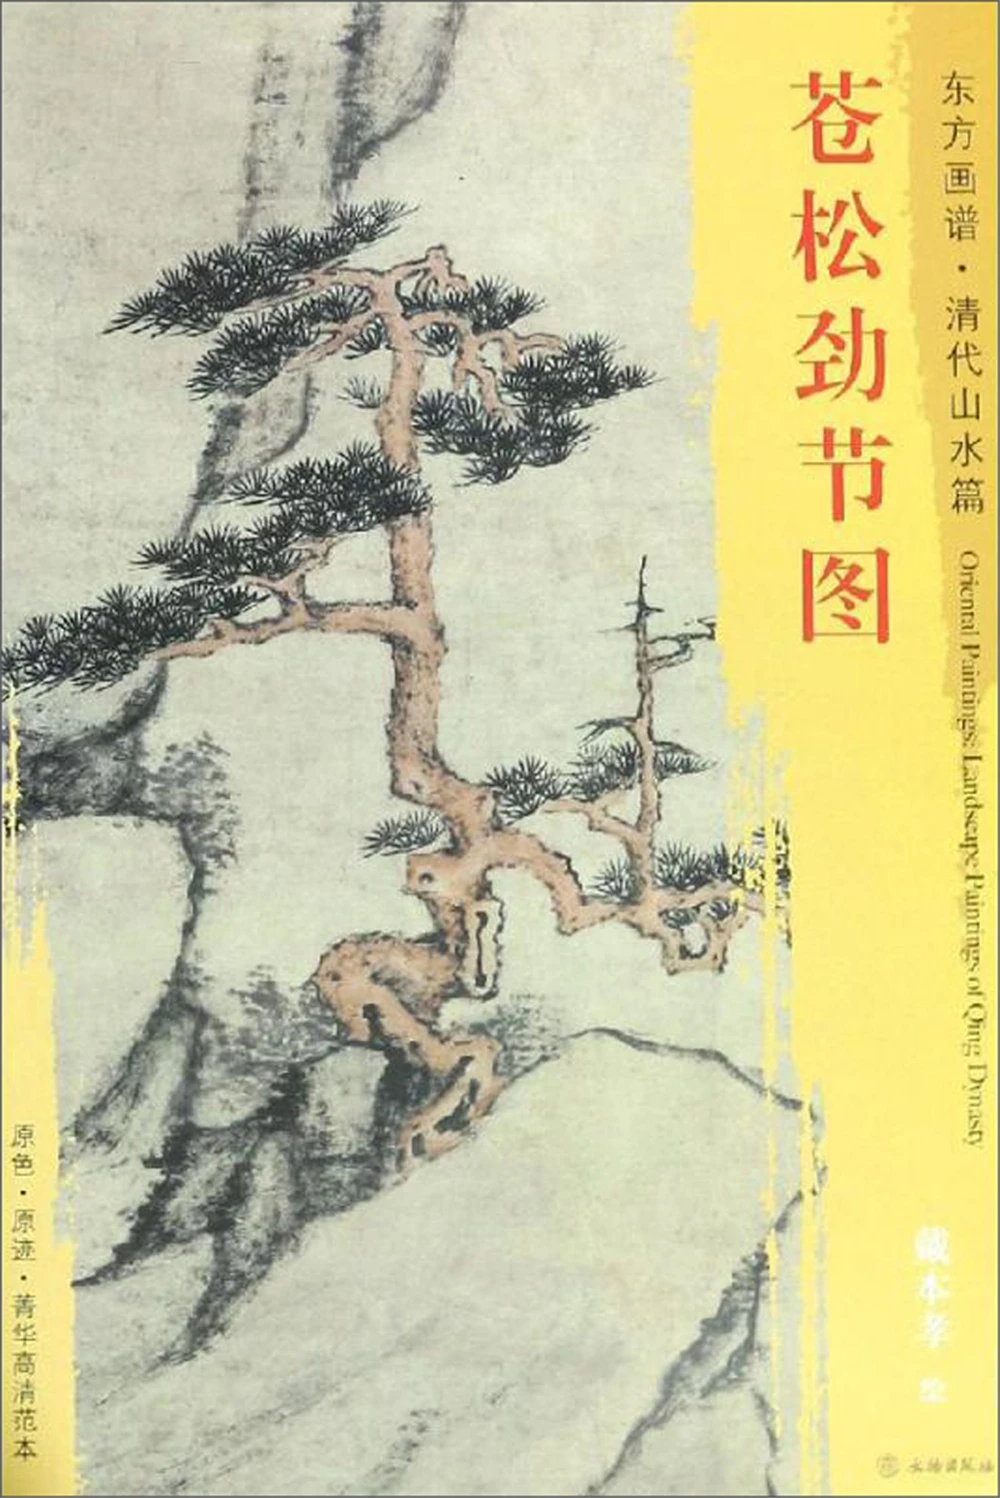 

Figure of Cang Loose Festival-Oriental Painting Book. Qing Dynasty Landscape Sketch book Art Drawing Painting copyBook